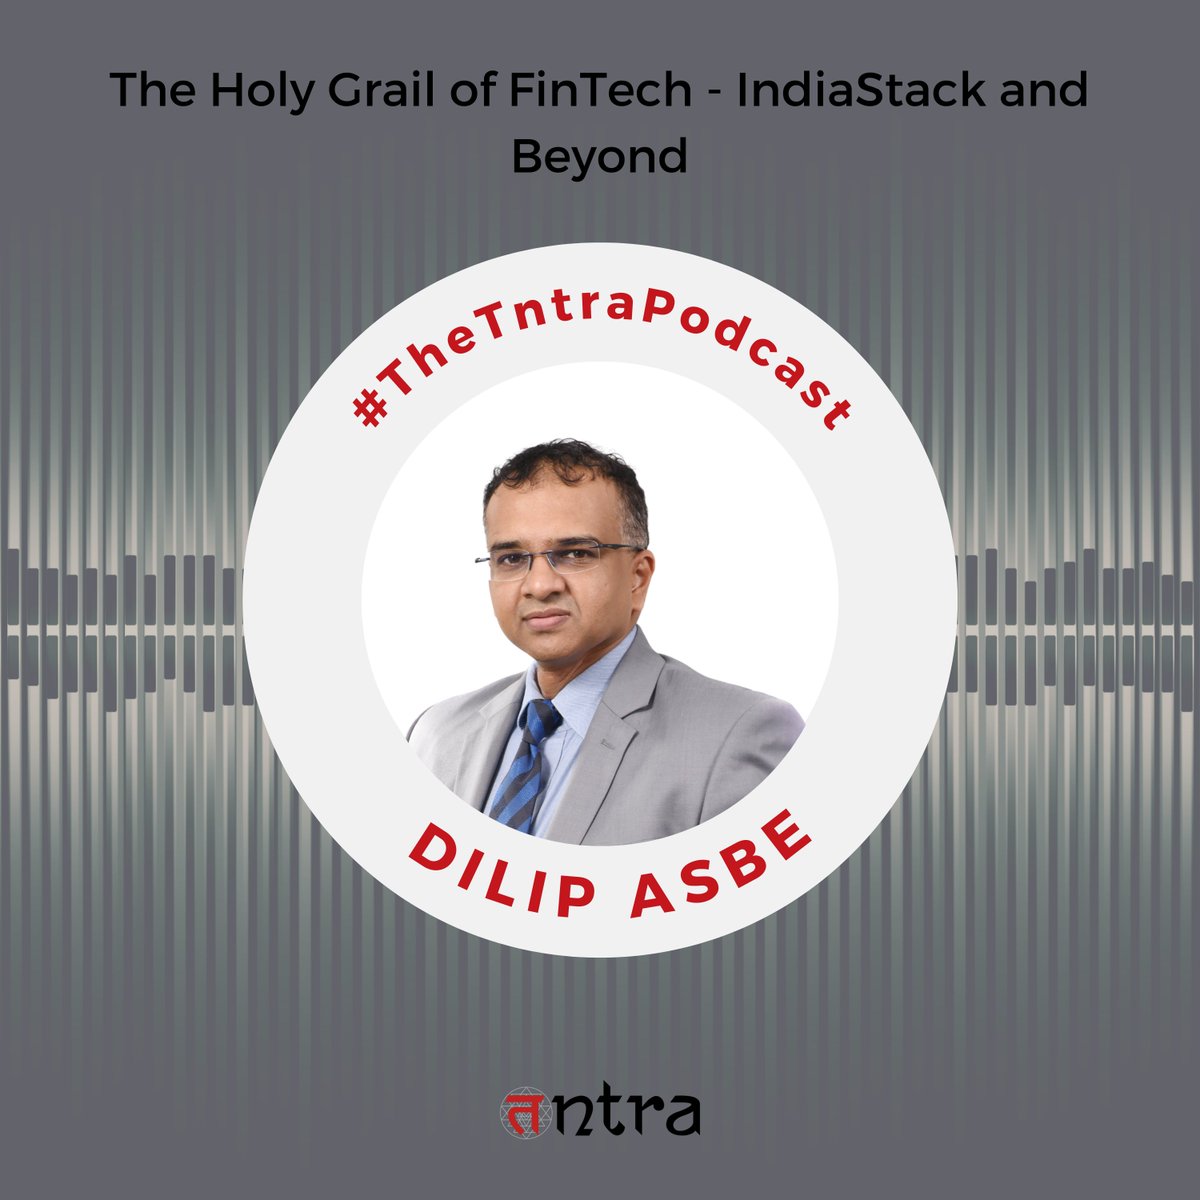 Hey #Amazon Users!! Are you curious about the revolutionary journey of India Stack and FinTech as we see it today? 

Here's the link to the episode.

music.amazon.com/podcasts/0355f…

#TheTntraPodcast #fintechpodcast #fintechs #fintechsolutions #fintechinnovations #fintechstartup